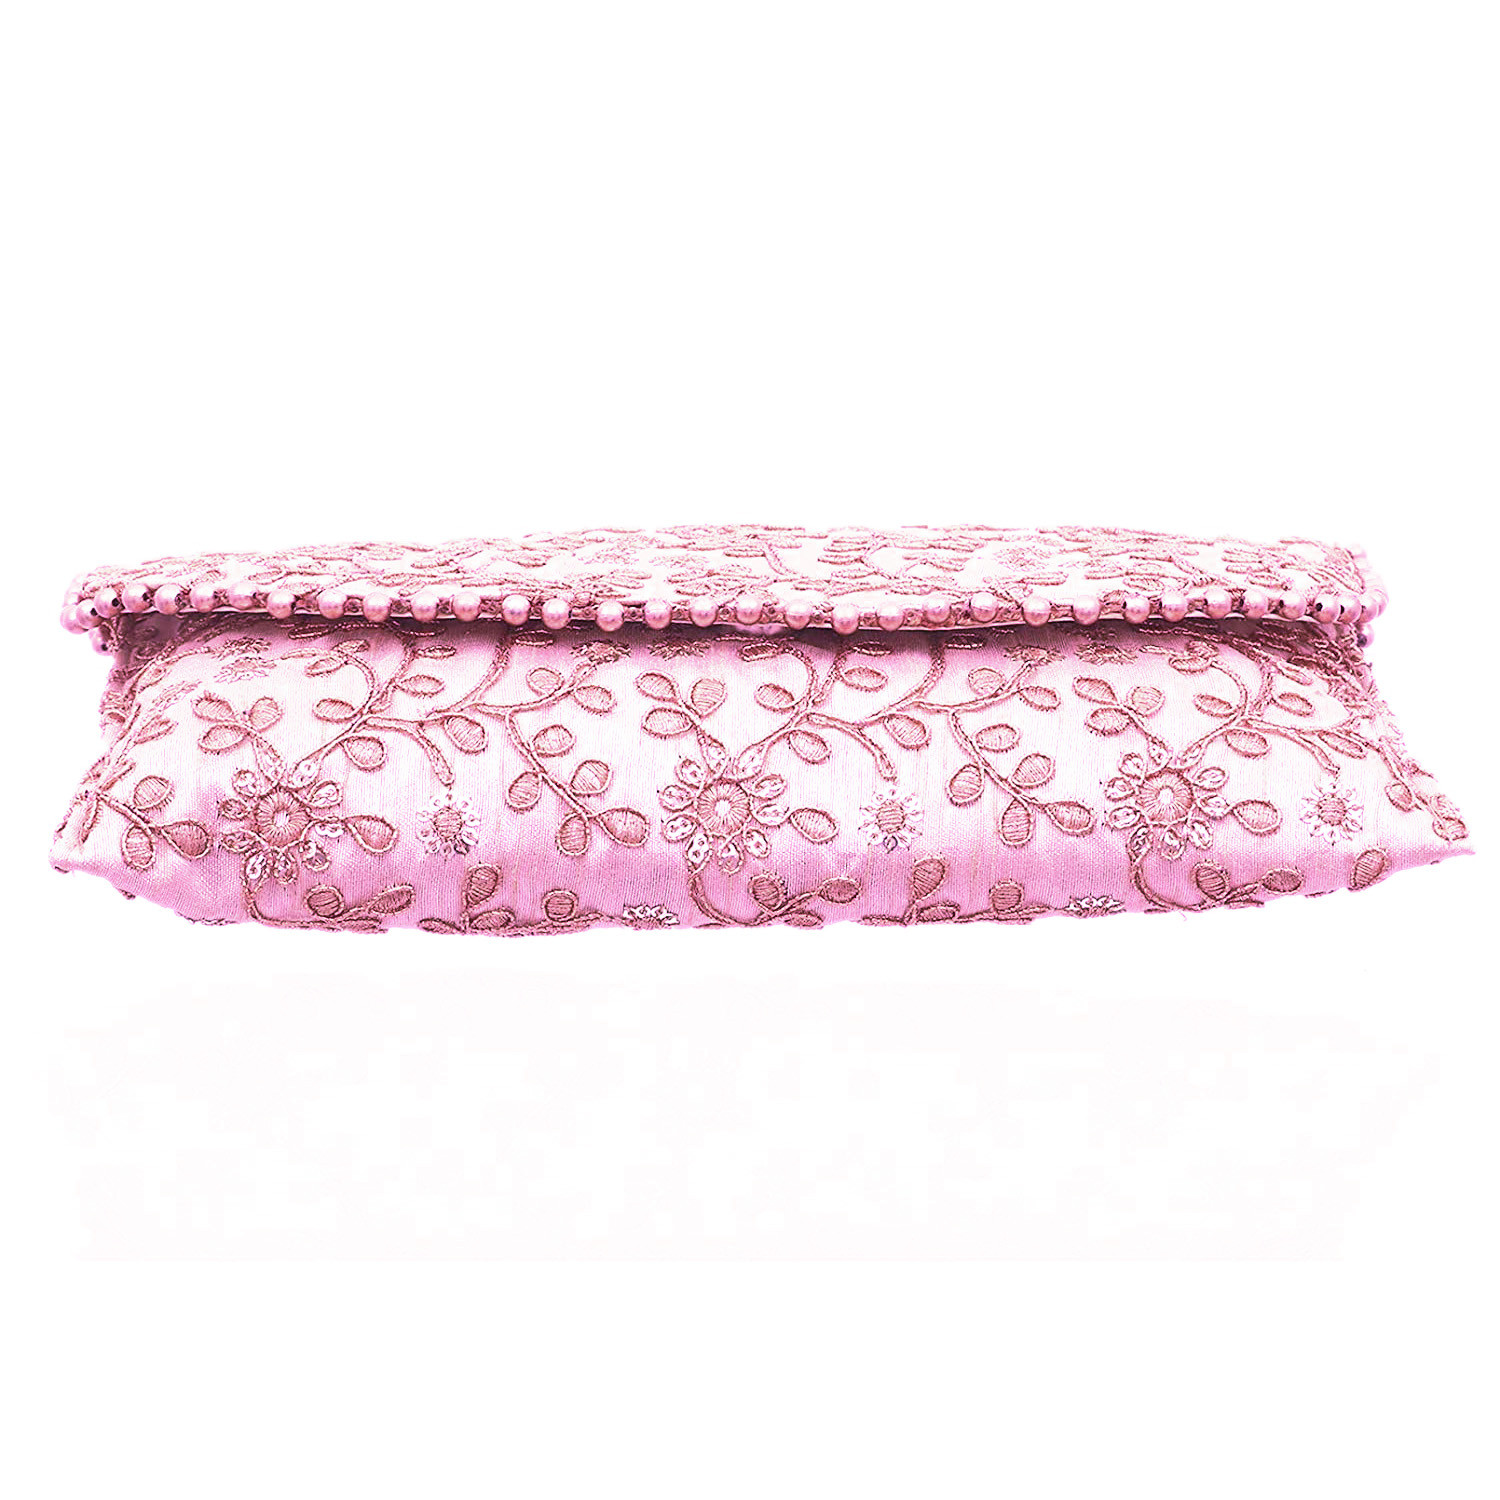 Kuber Industries Embroidery Golden Pearl Border Clutch|Hand Purse & Pearls Handle With Magnetic Lock For Woman,Girls (Pink)